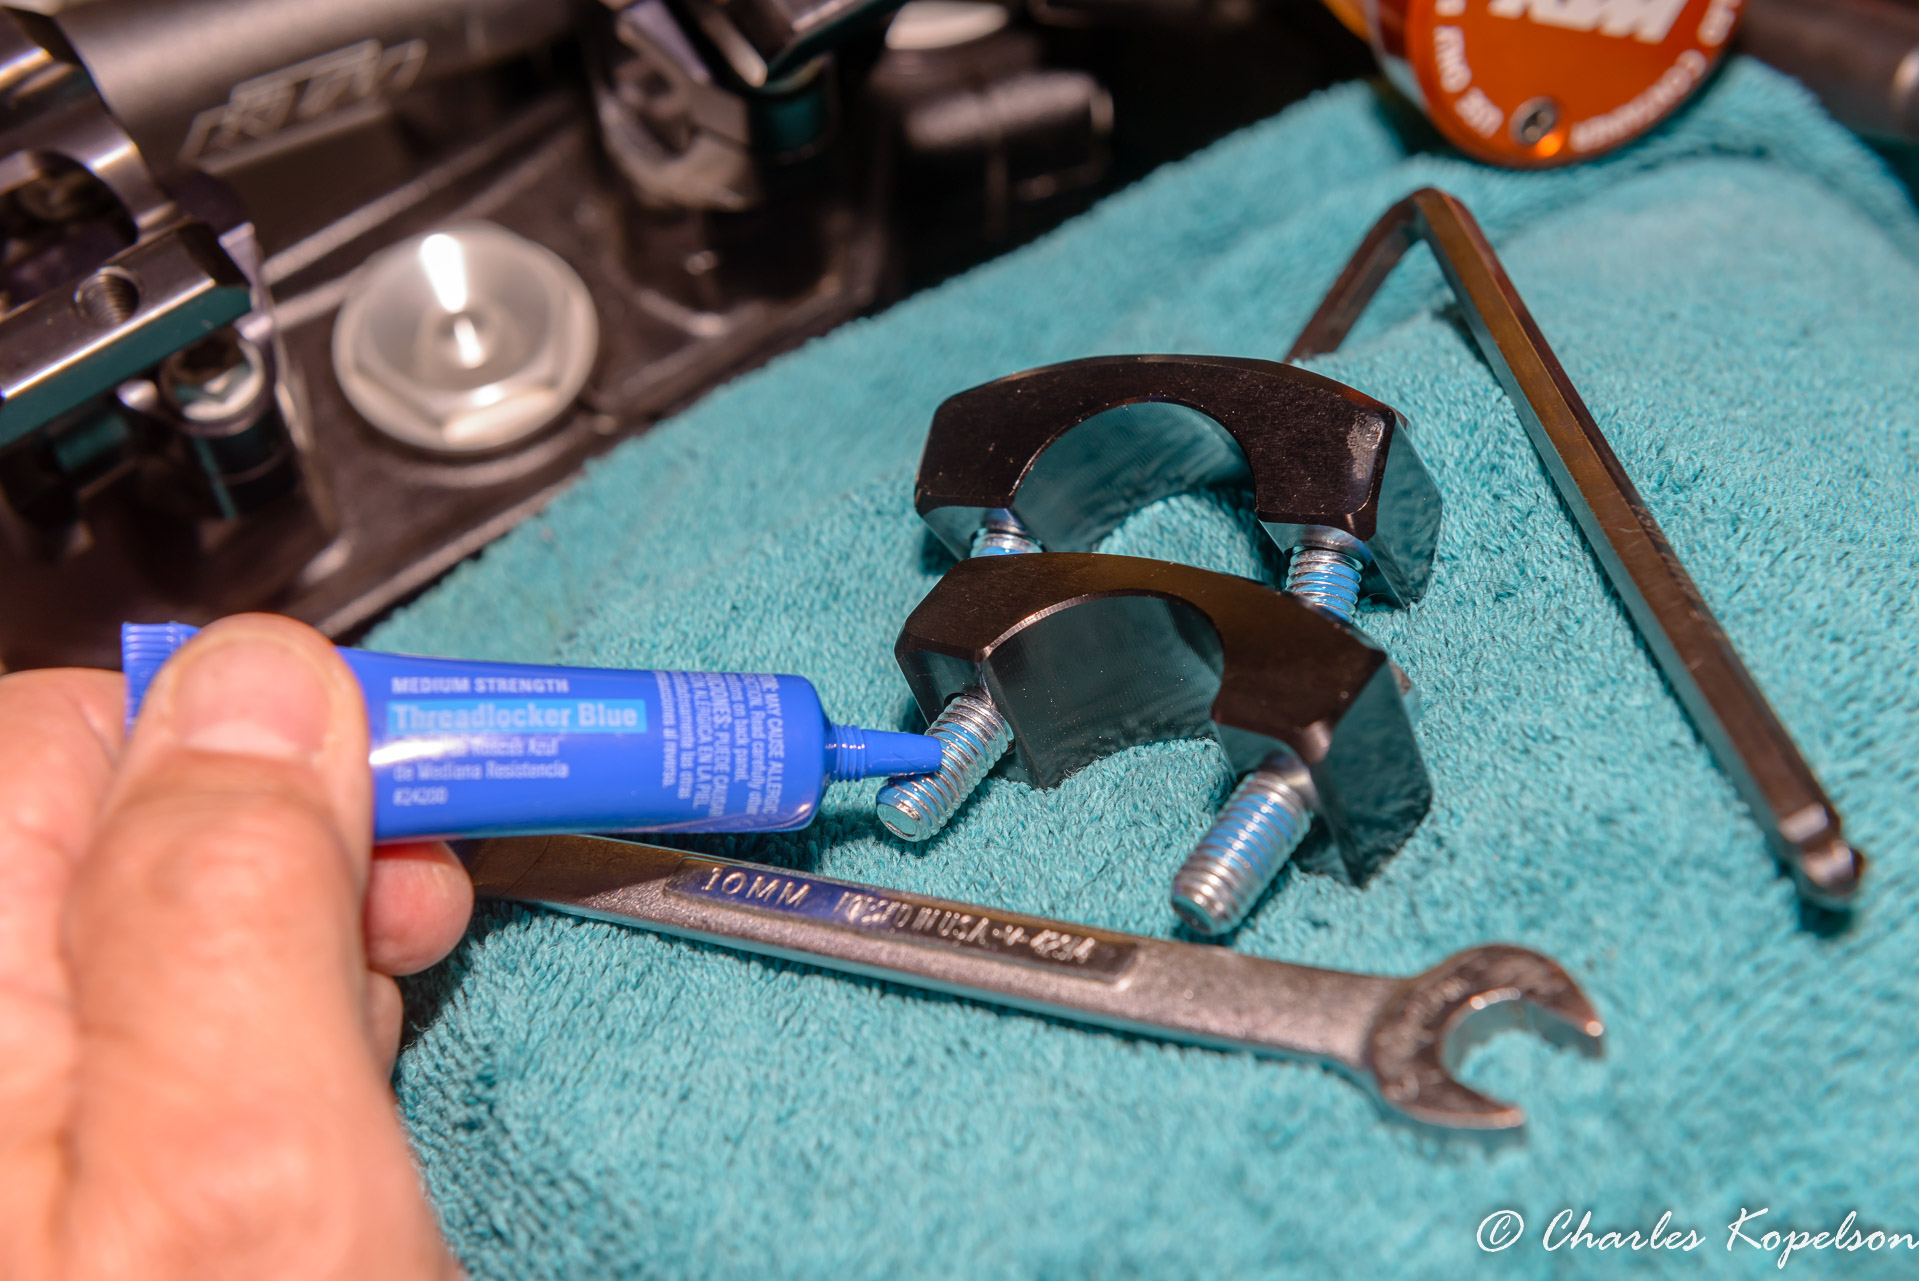 Put some Locktite blue on  the ROX clamp bolts.